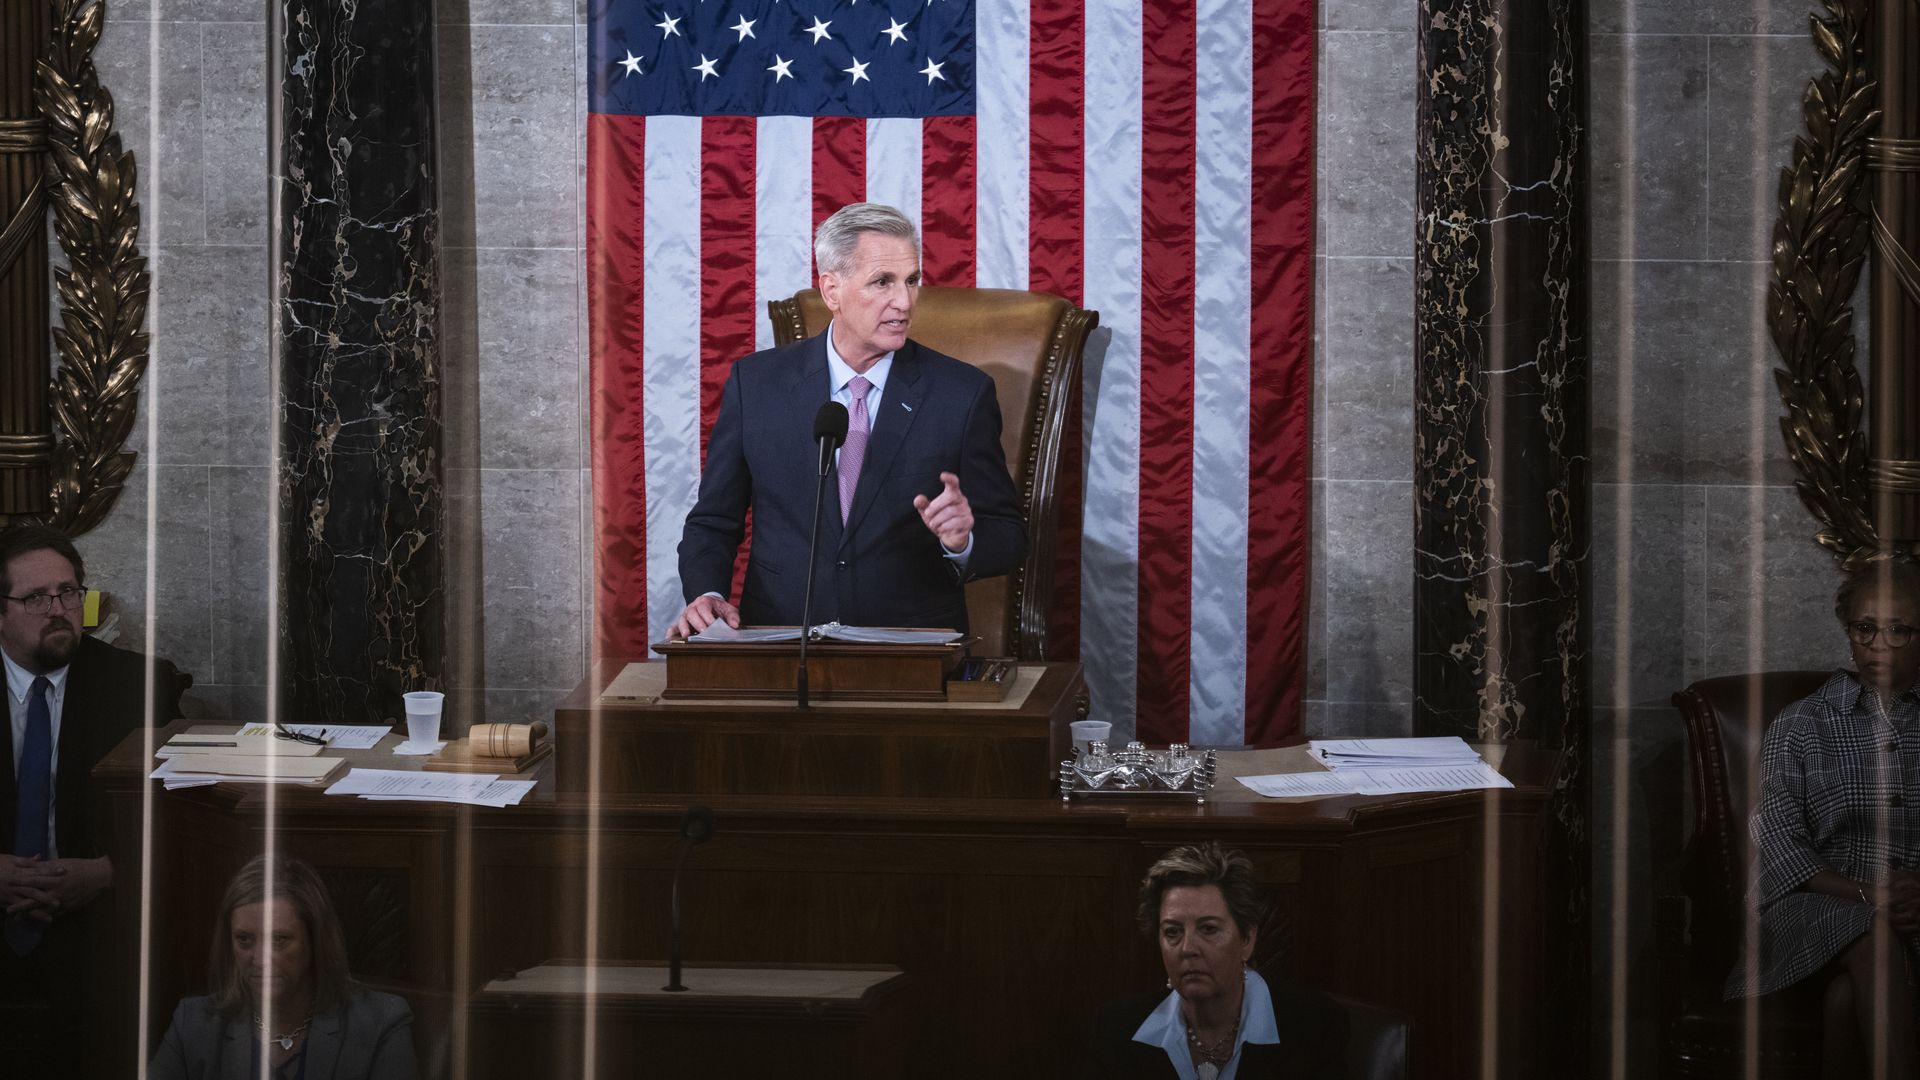 Speaker of the House Kevin McCarthy, R-Calif., addresses the 118th Congress on Saturday, January 7, 2023